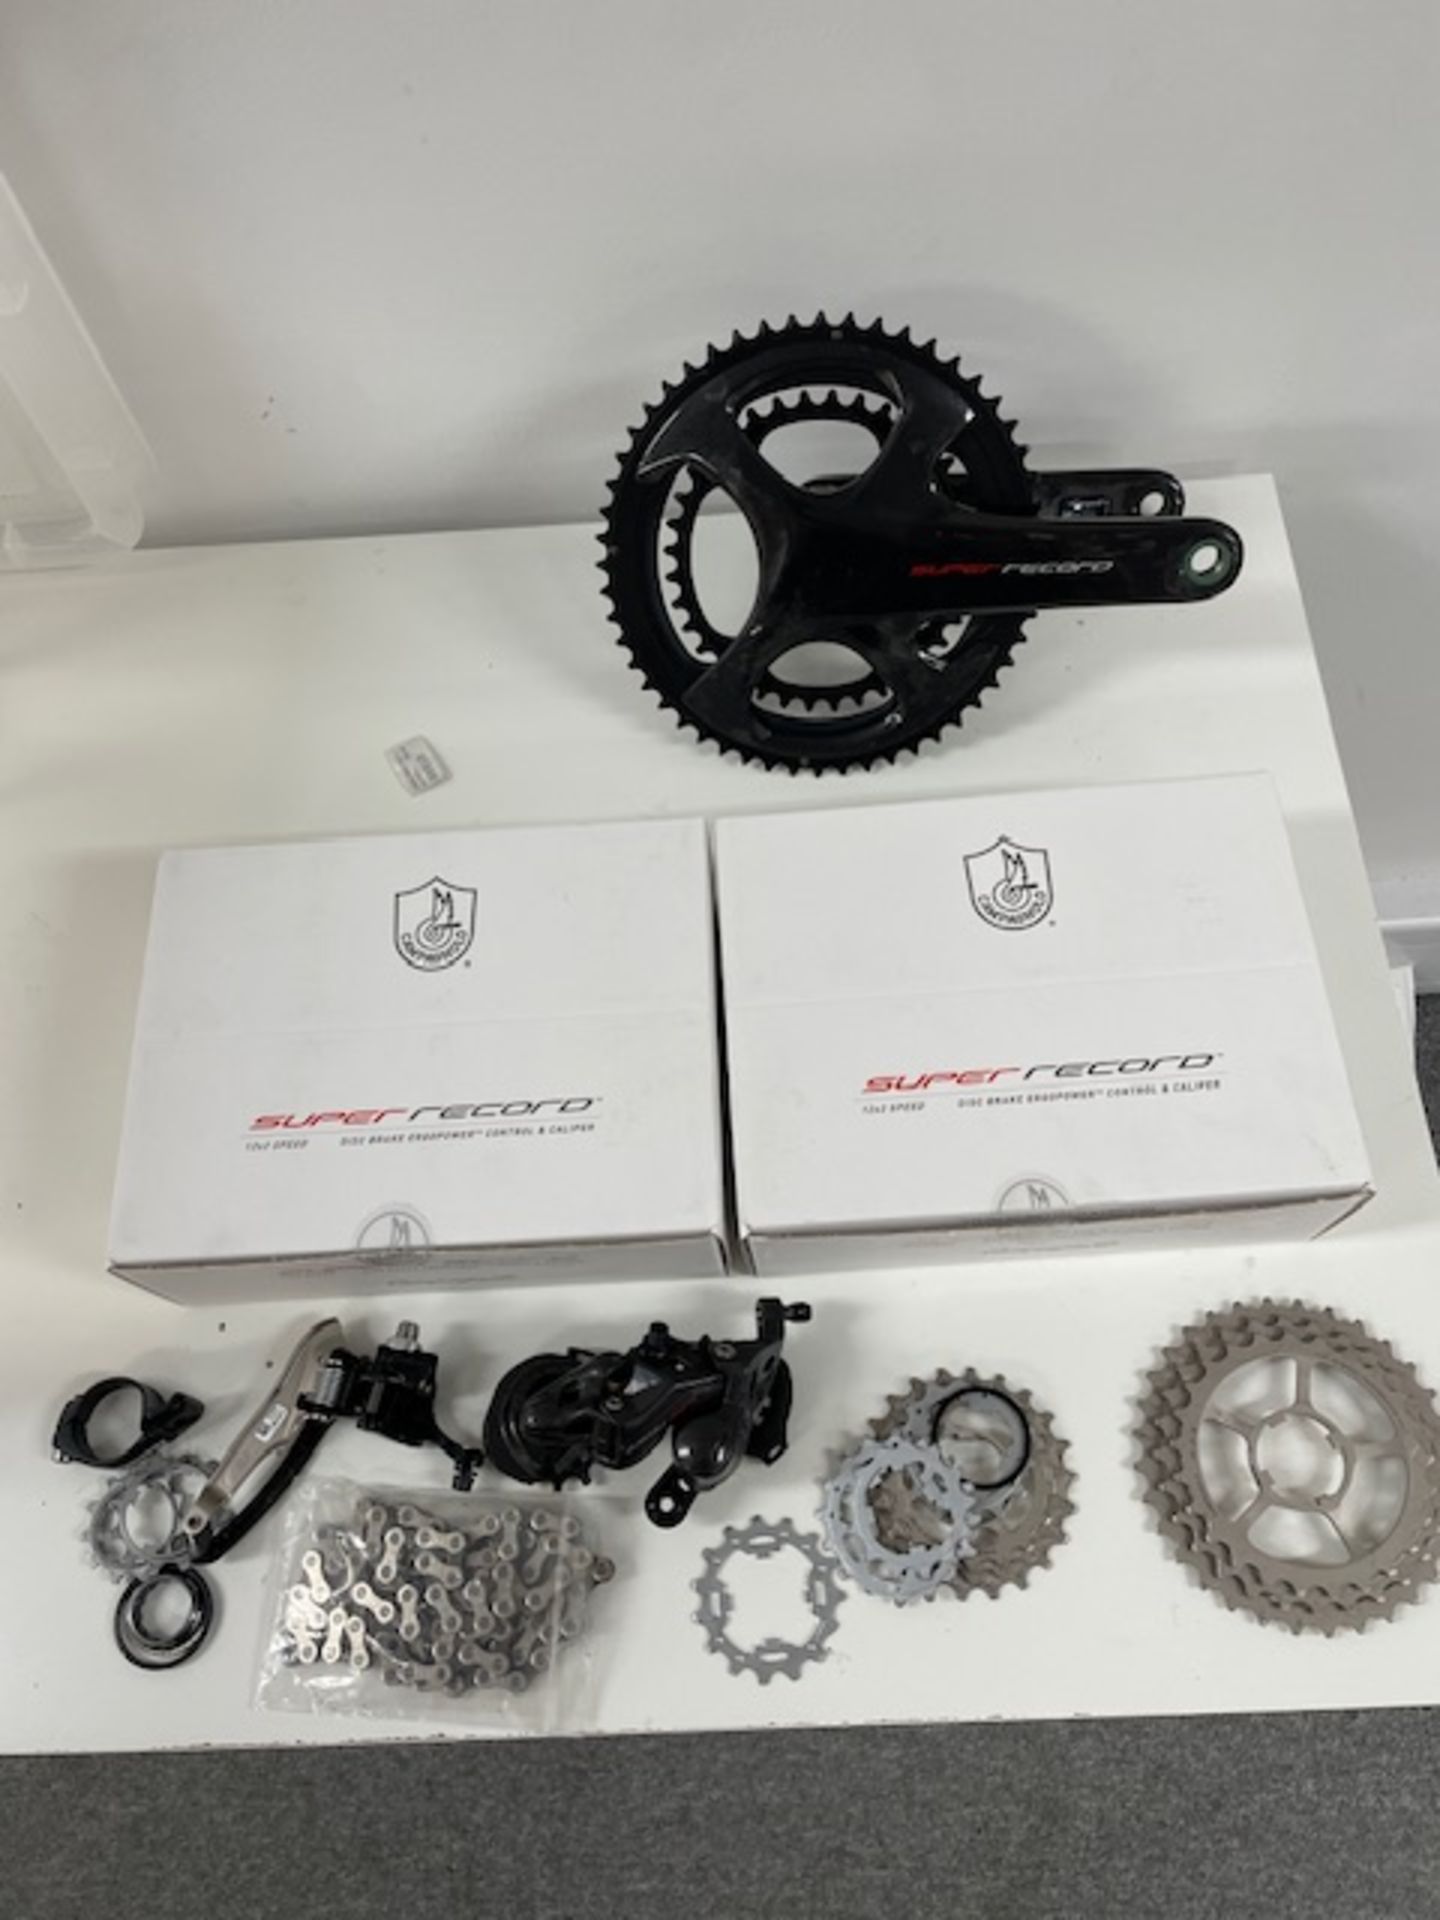 Campagnolo “Super Record 12” Speed Hydro Mechanical Group Set Including Chain set 5236172.5 & 1132